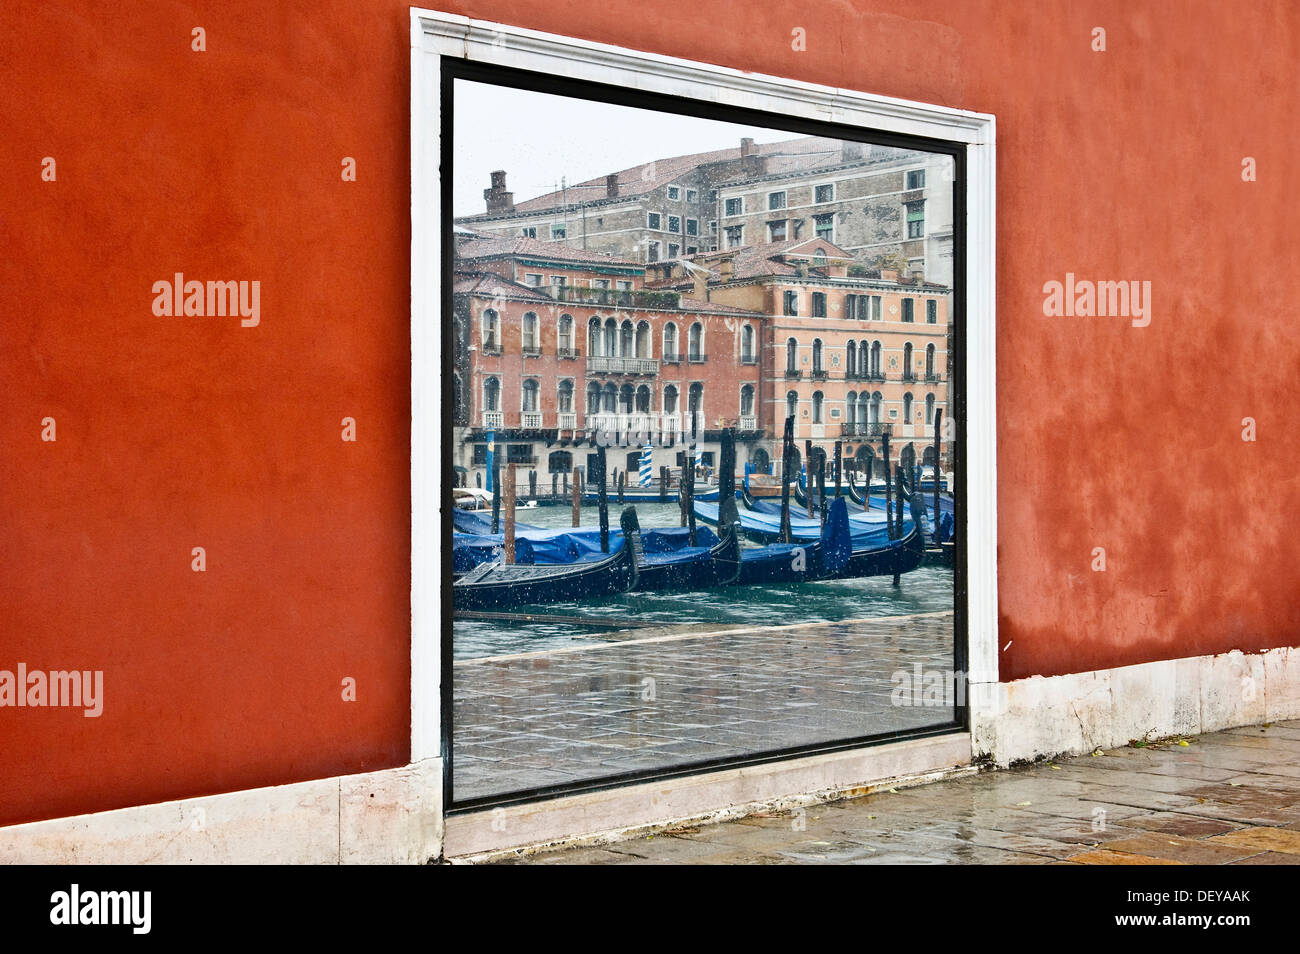 Reflections of the Grand Canal in a window, Venice, Italy, Europe Stock Photo